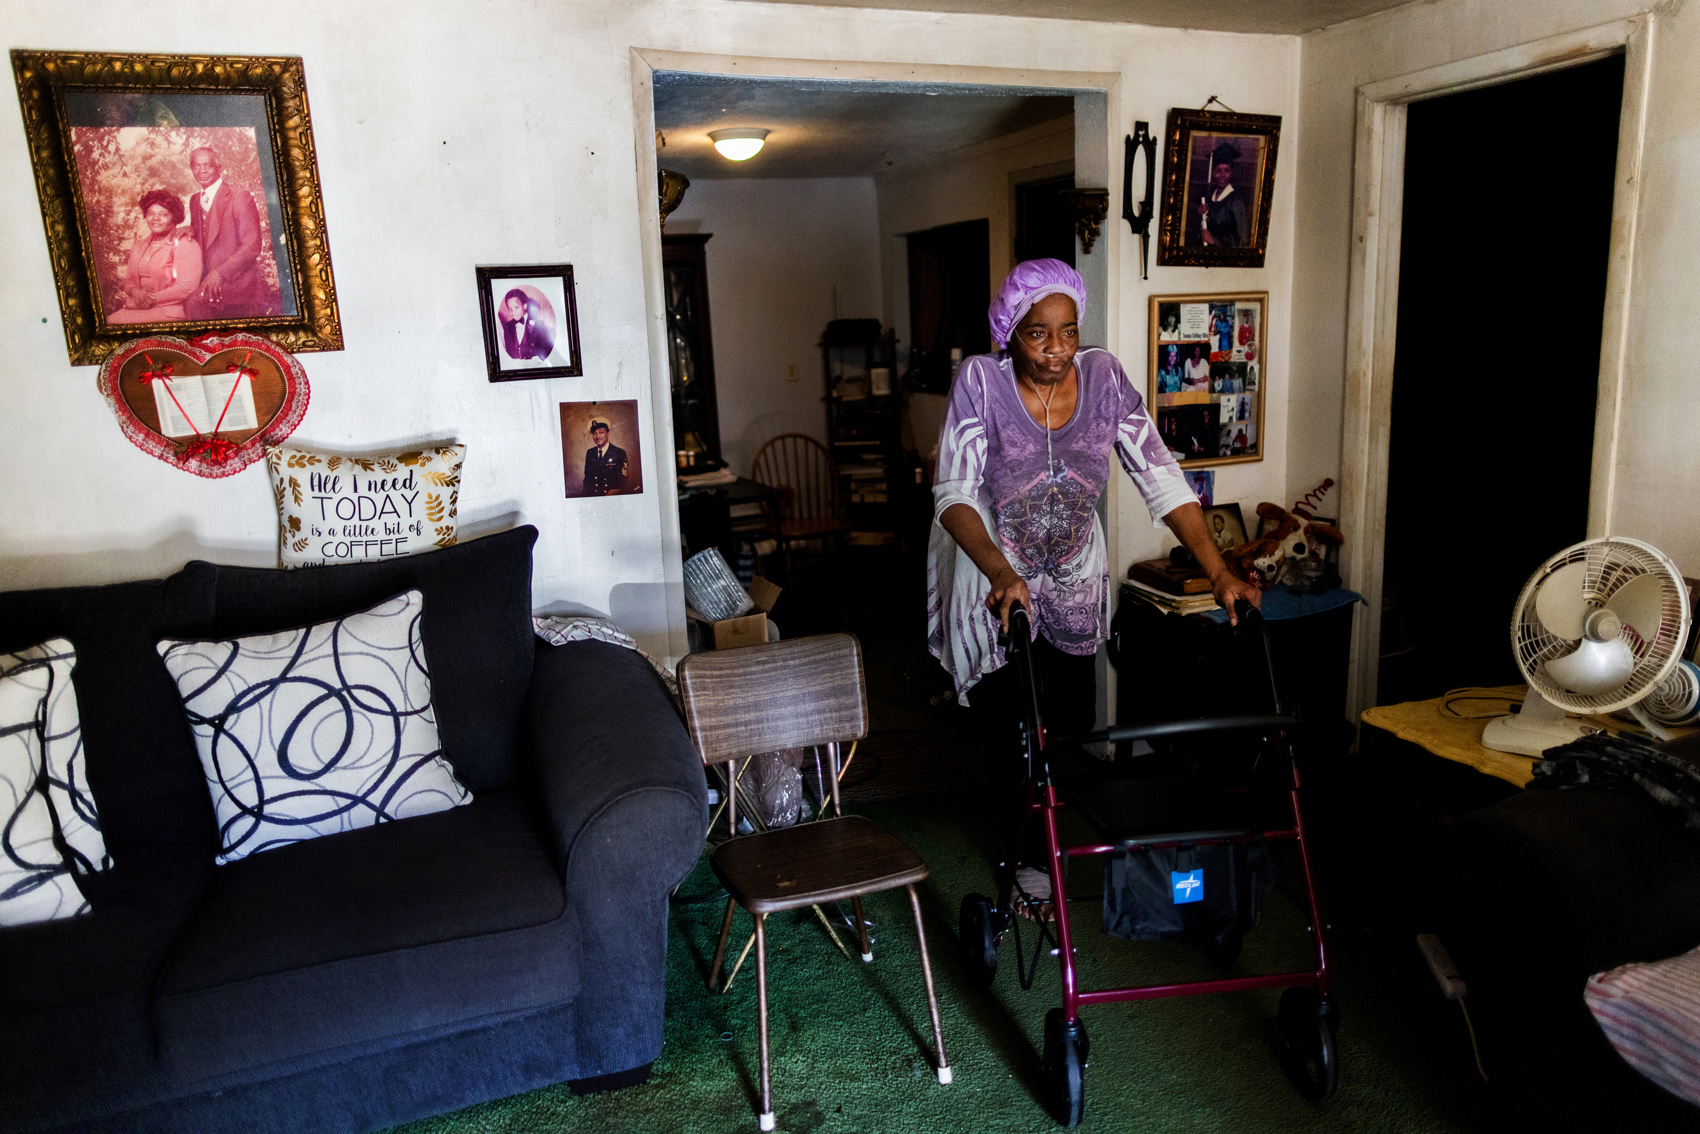 She fell through all the cracks. Now, finally, her Harvey-damaged home will be rebuilt.